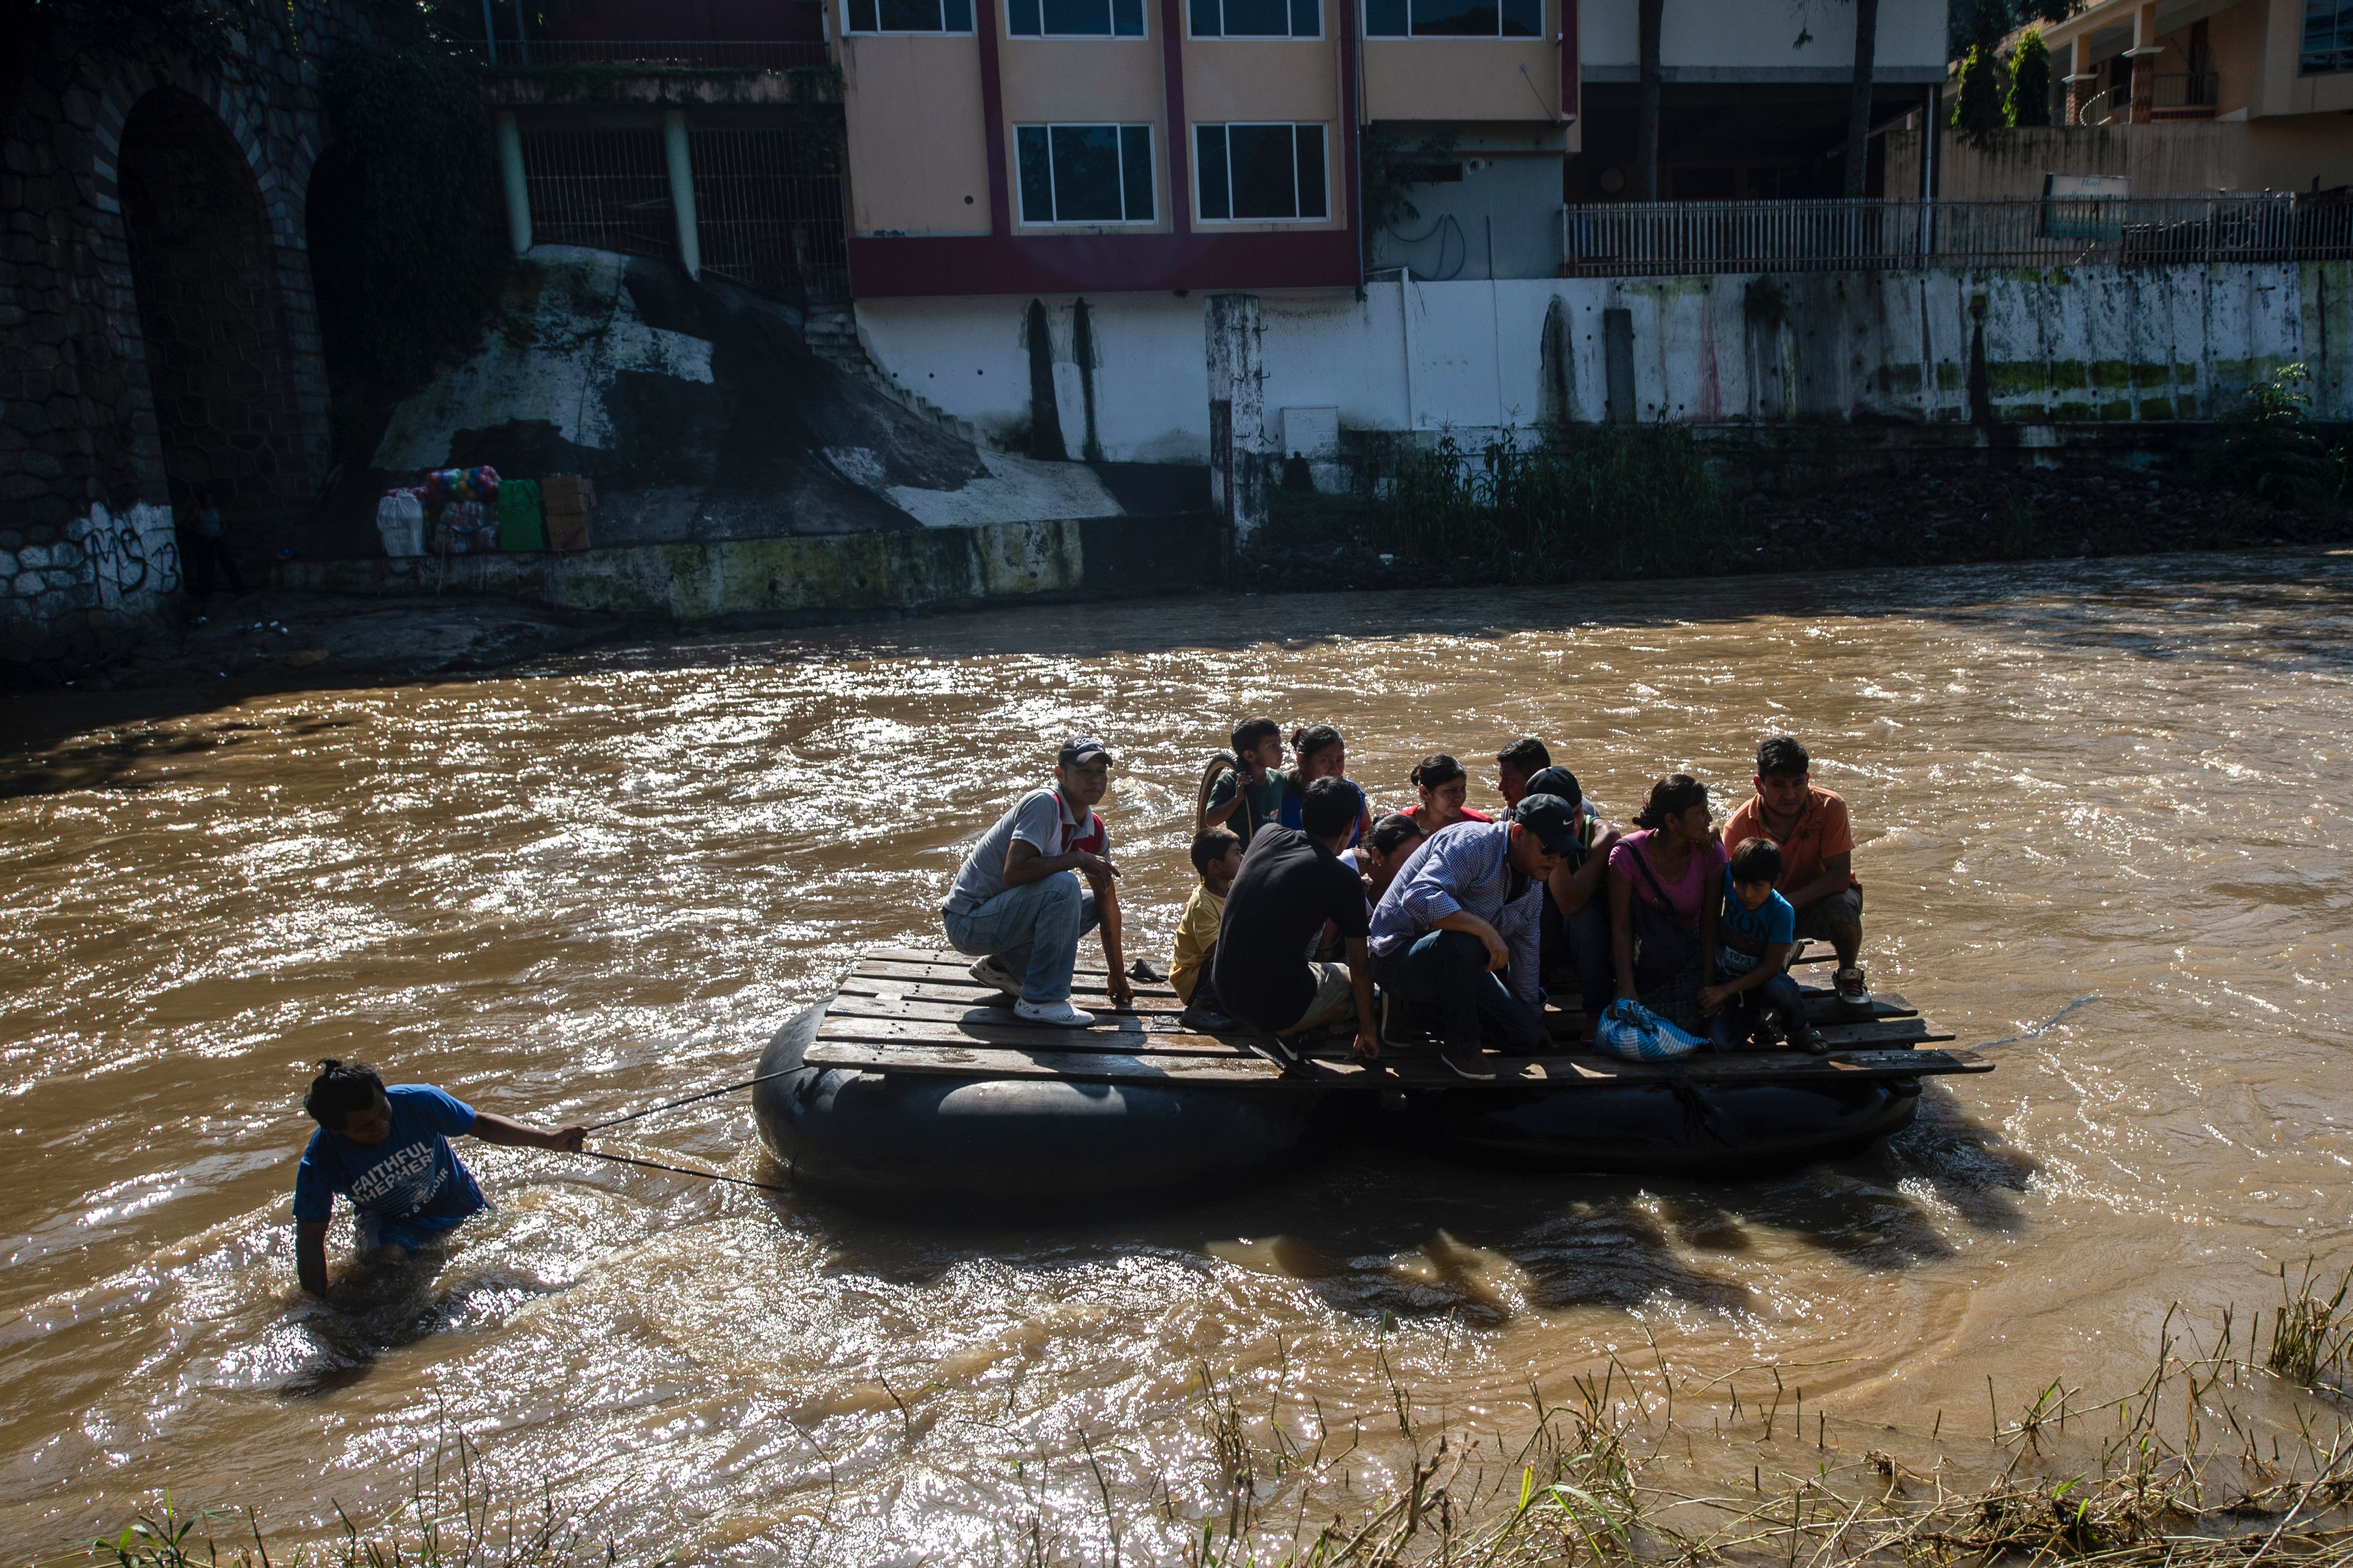 Migrants and residents use a makeshift raft to cross the Suchiate river from El Carmen in Guatemala to Talisman in Chiapas State, Mexico, on June 7, 2019. - The United States warned Friday that President Donald Trump's punitive tariffs on imports from Mexico were on course to take effect next week, despite headway in talks on stemming the surge in migration towards the US border. (Photo by PEDRO PARDO/AFP/Getty Images)